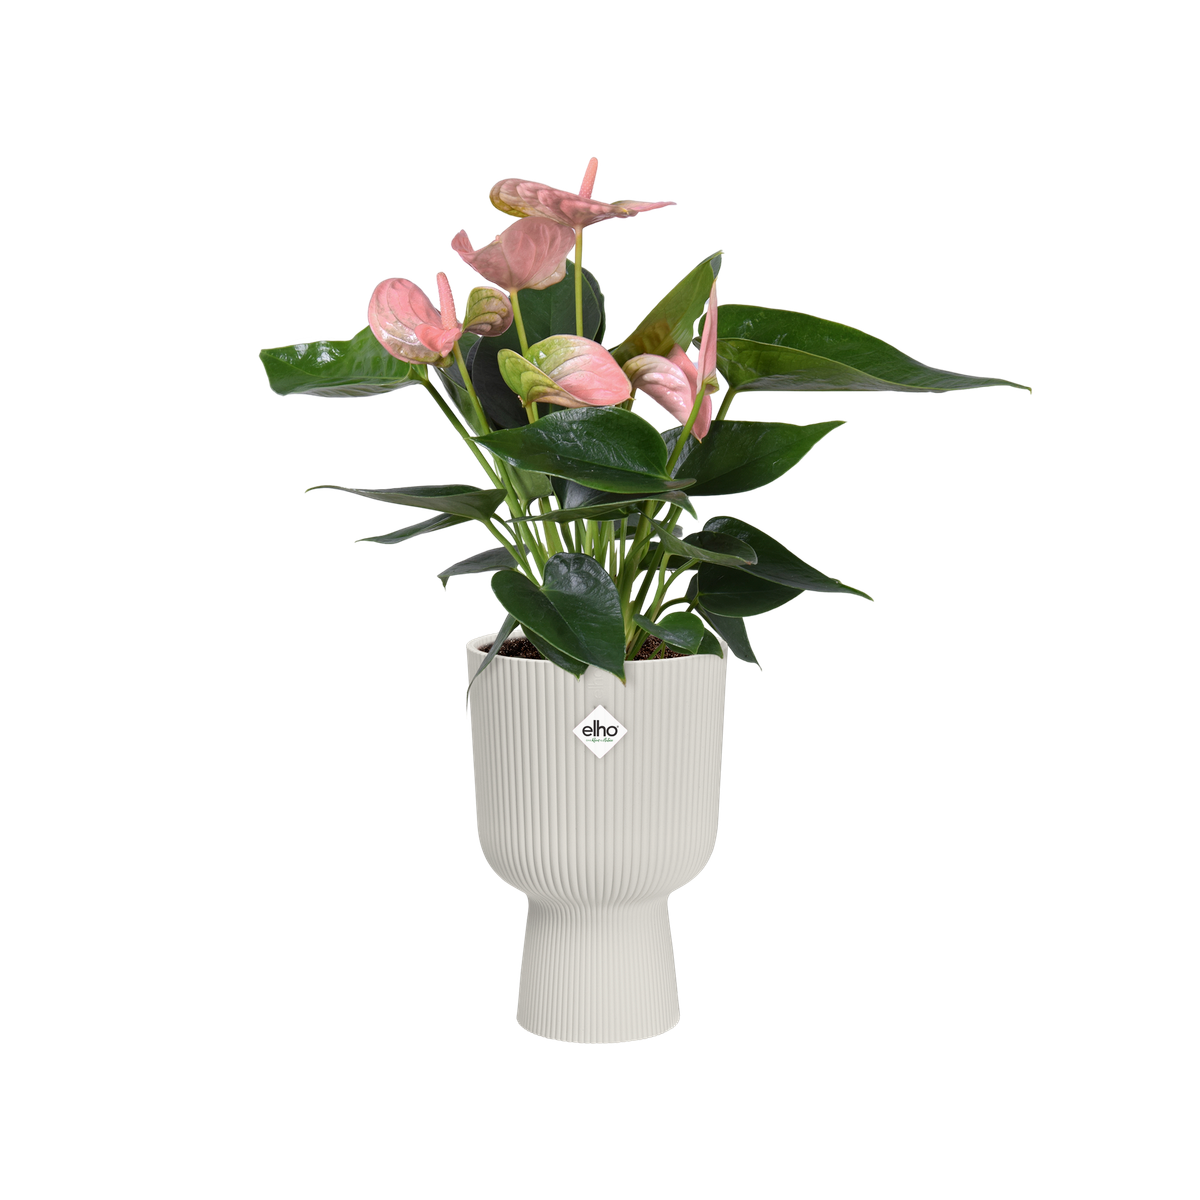 vibes fold rond 14cm rose poudré - elho® - Give room to nature